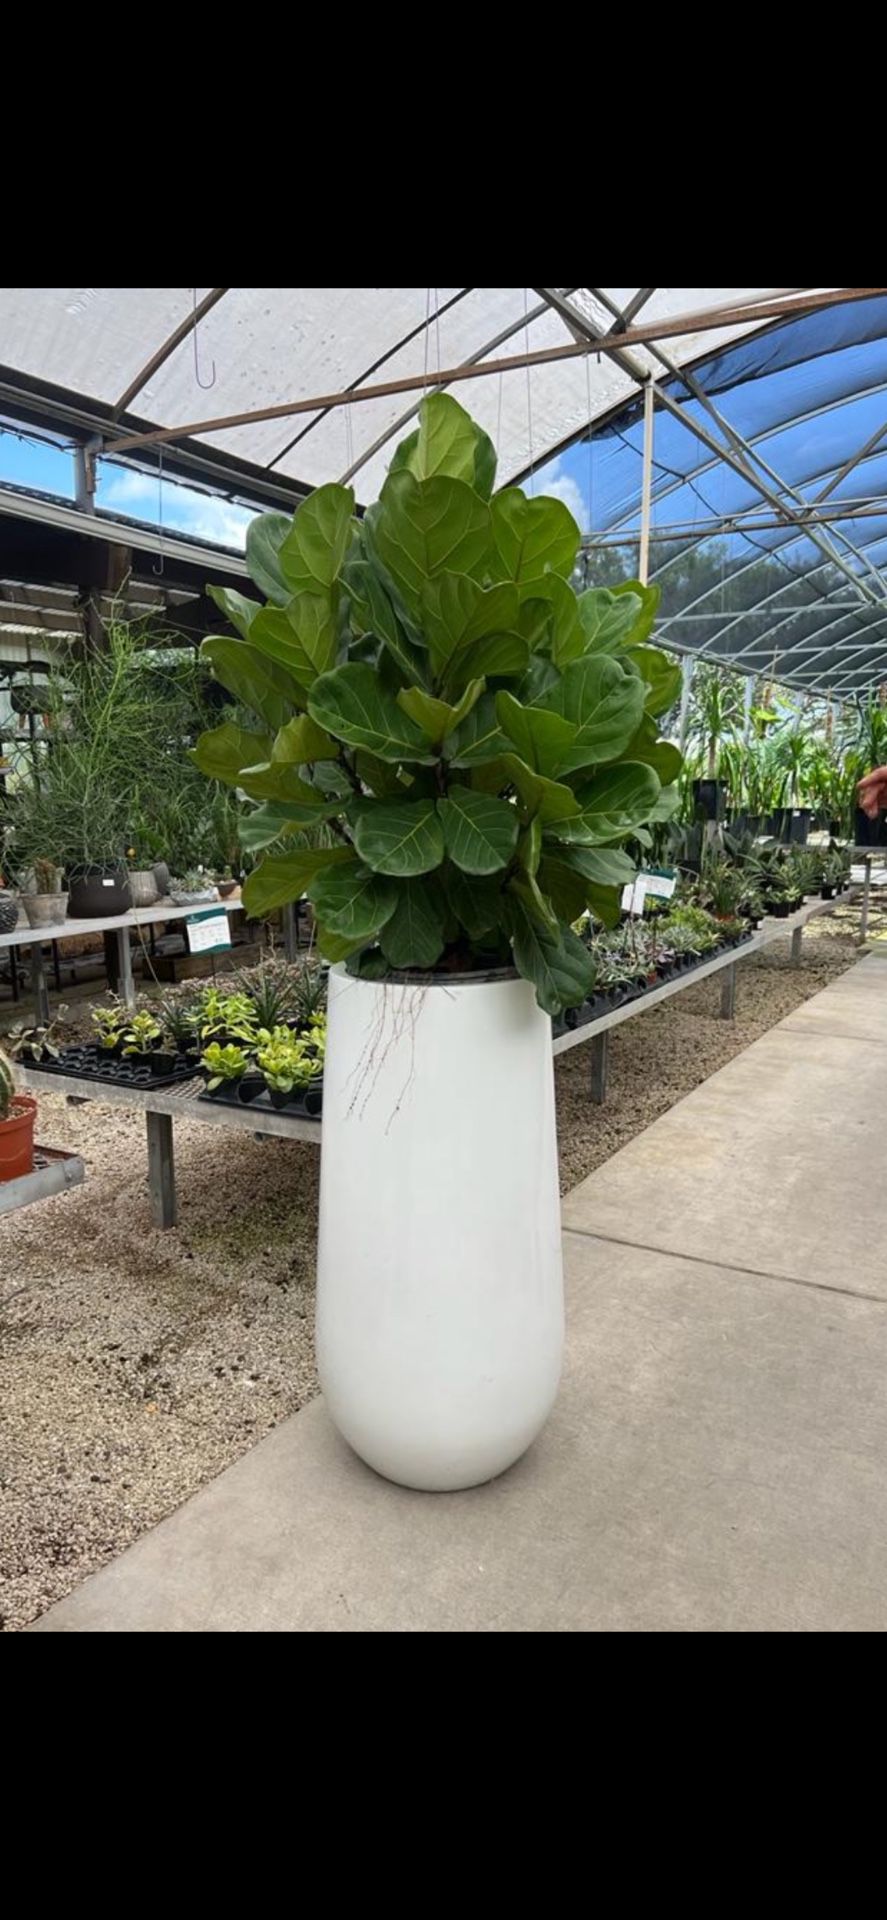 New!!! Big And Beautiful Elegant Glossy Pot 40” (Plant Not Included) Was $600